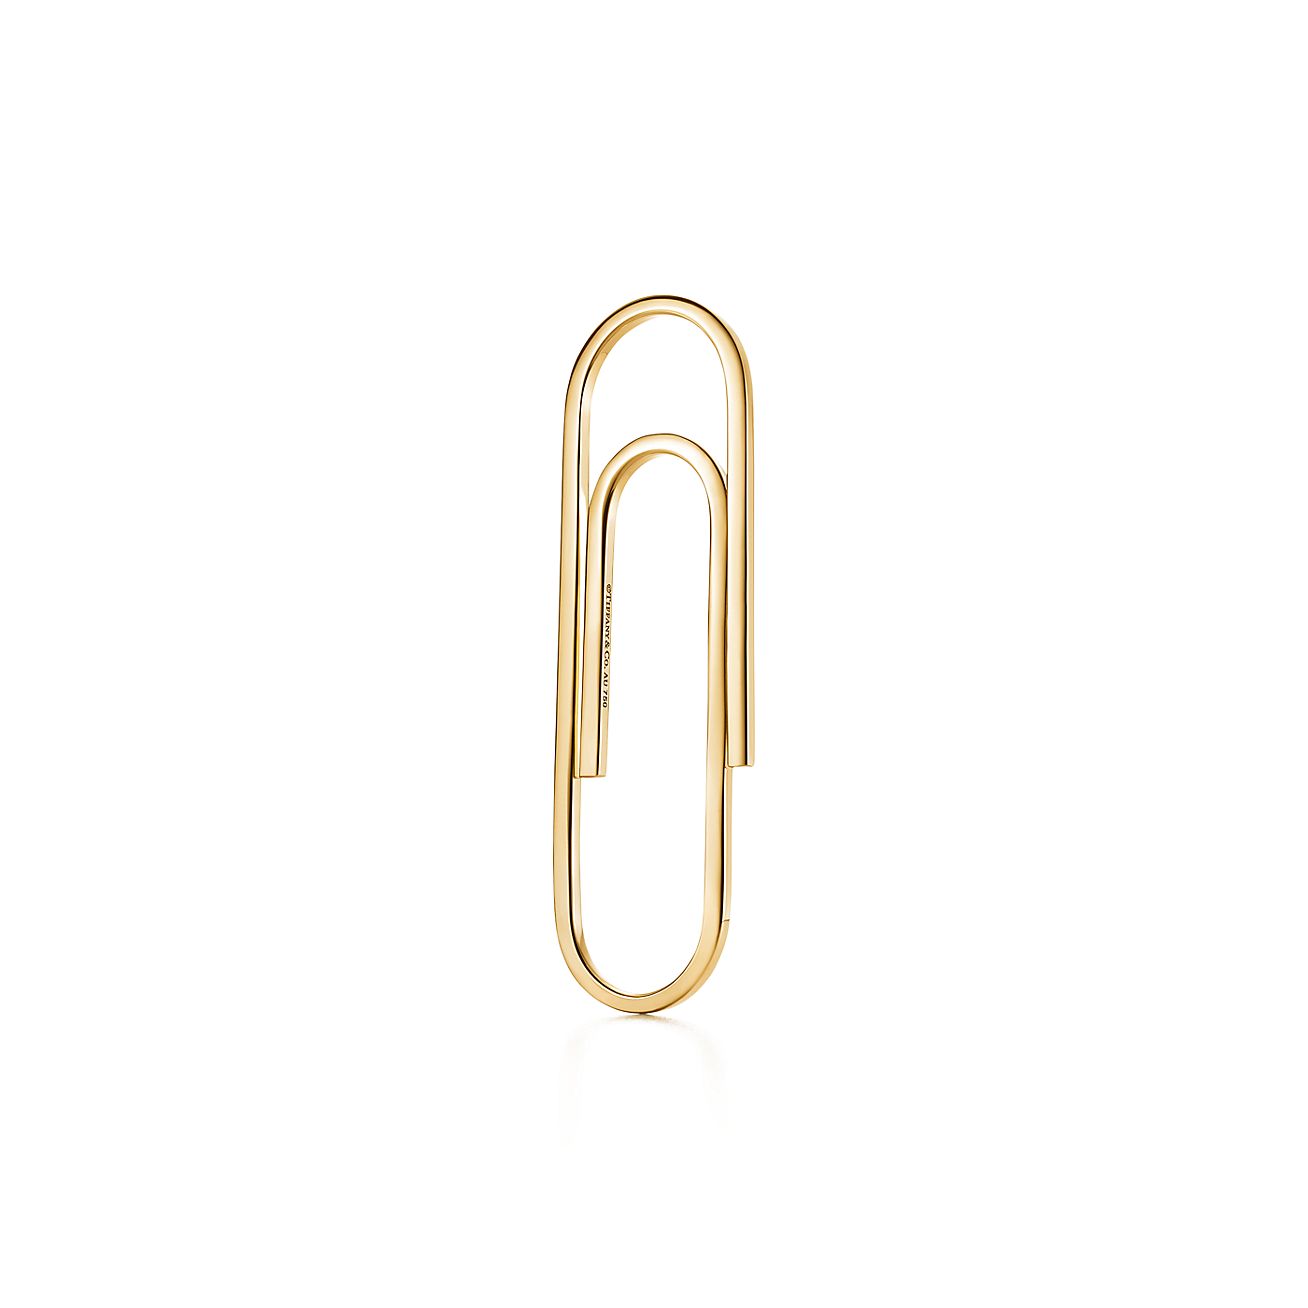 Shop Everyday Objects 18K Gold Paper 